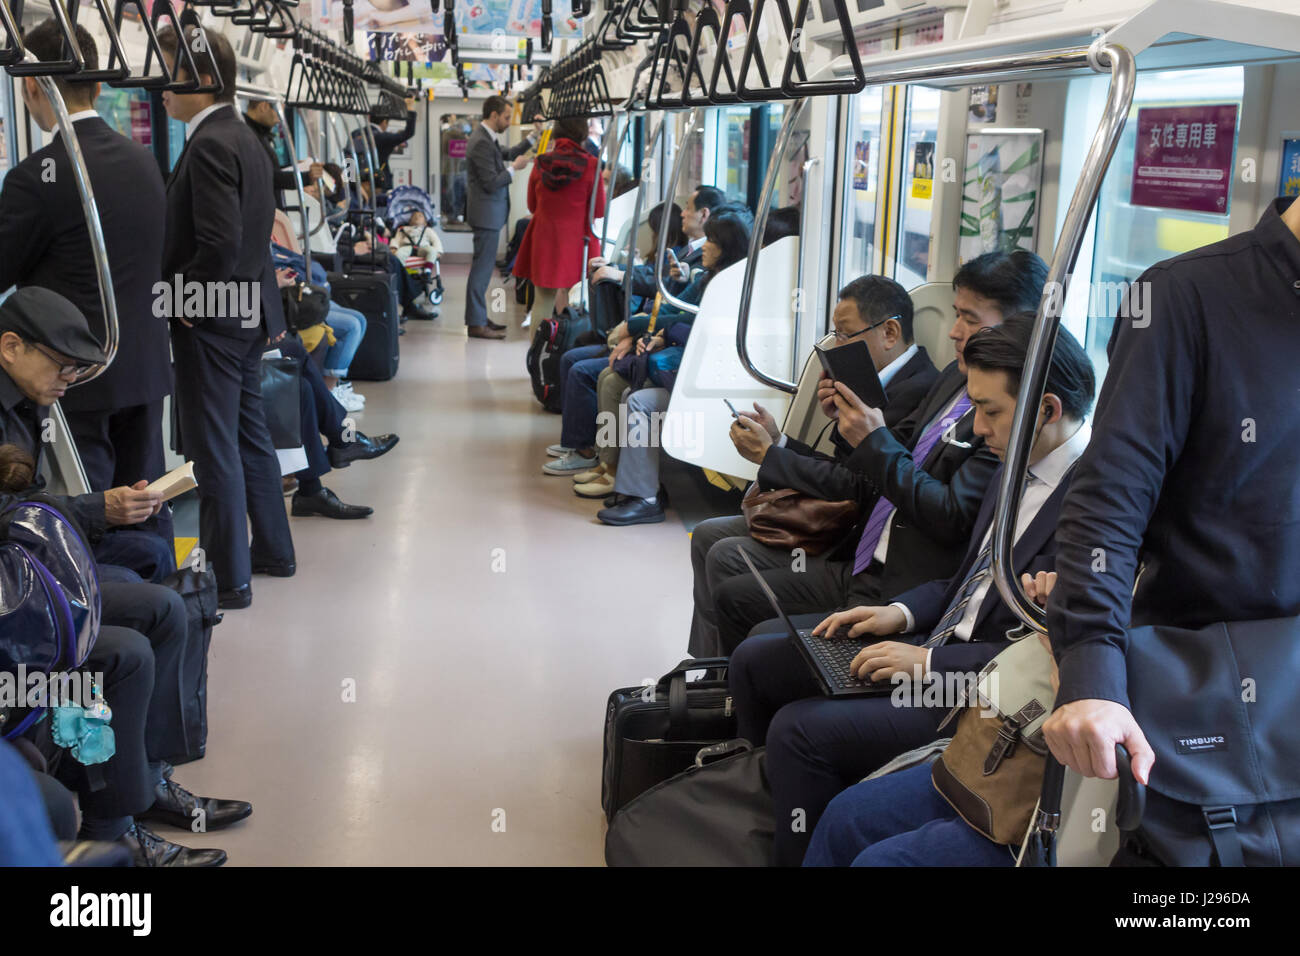 Tokio, Japan - April 8th, 2017: Passengers reading, using laptop and tablets, onboard a japanese train on the way to Tokio Station. Stock Photo